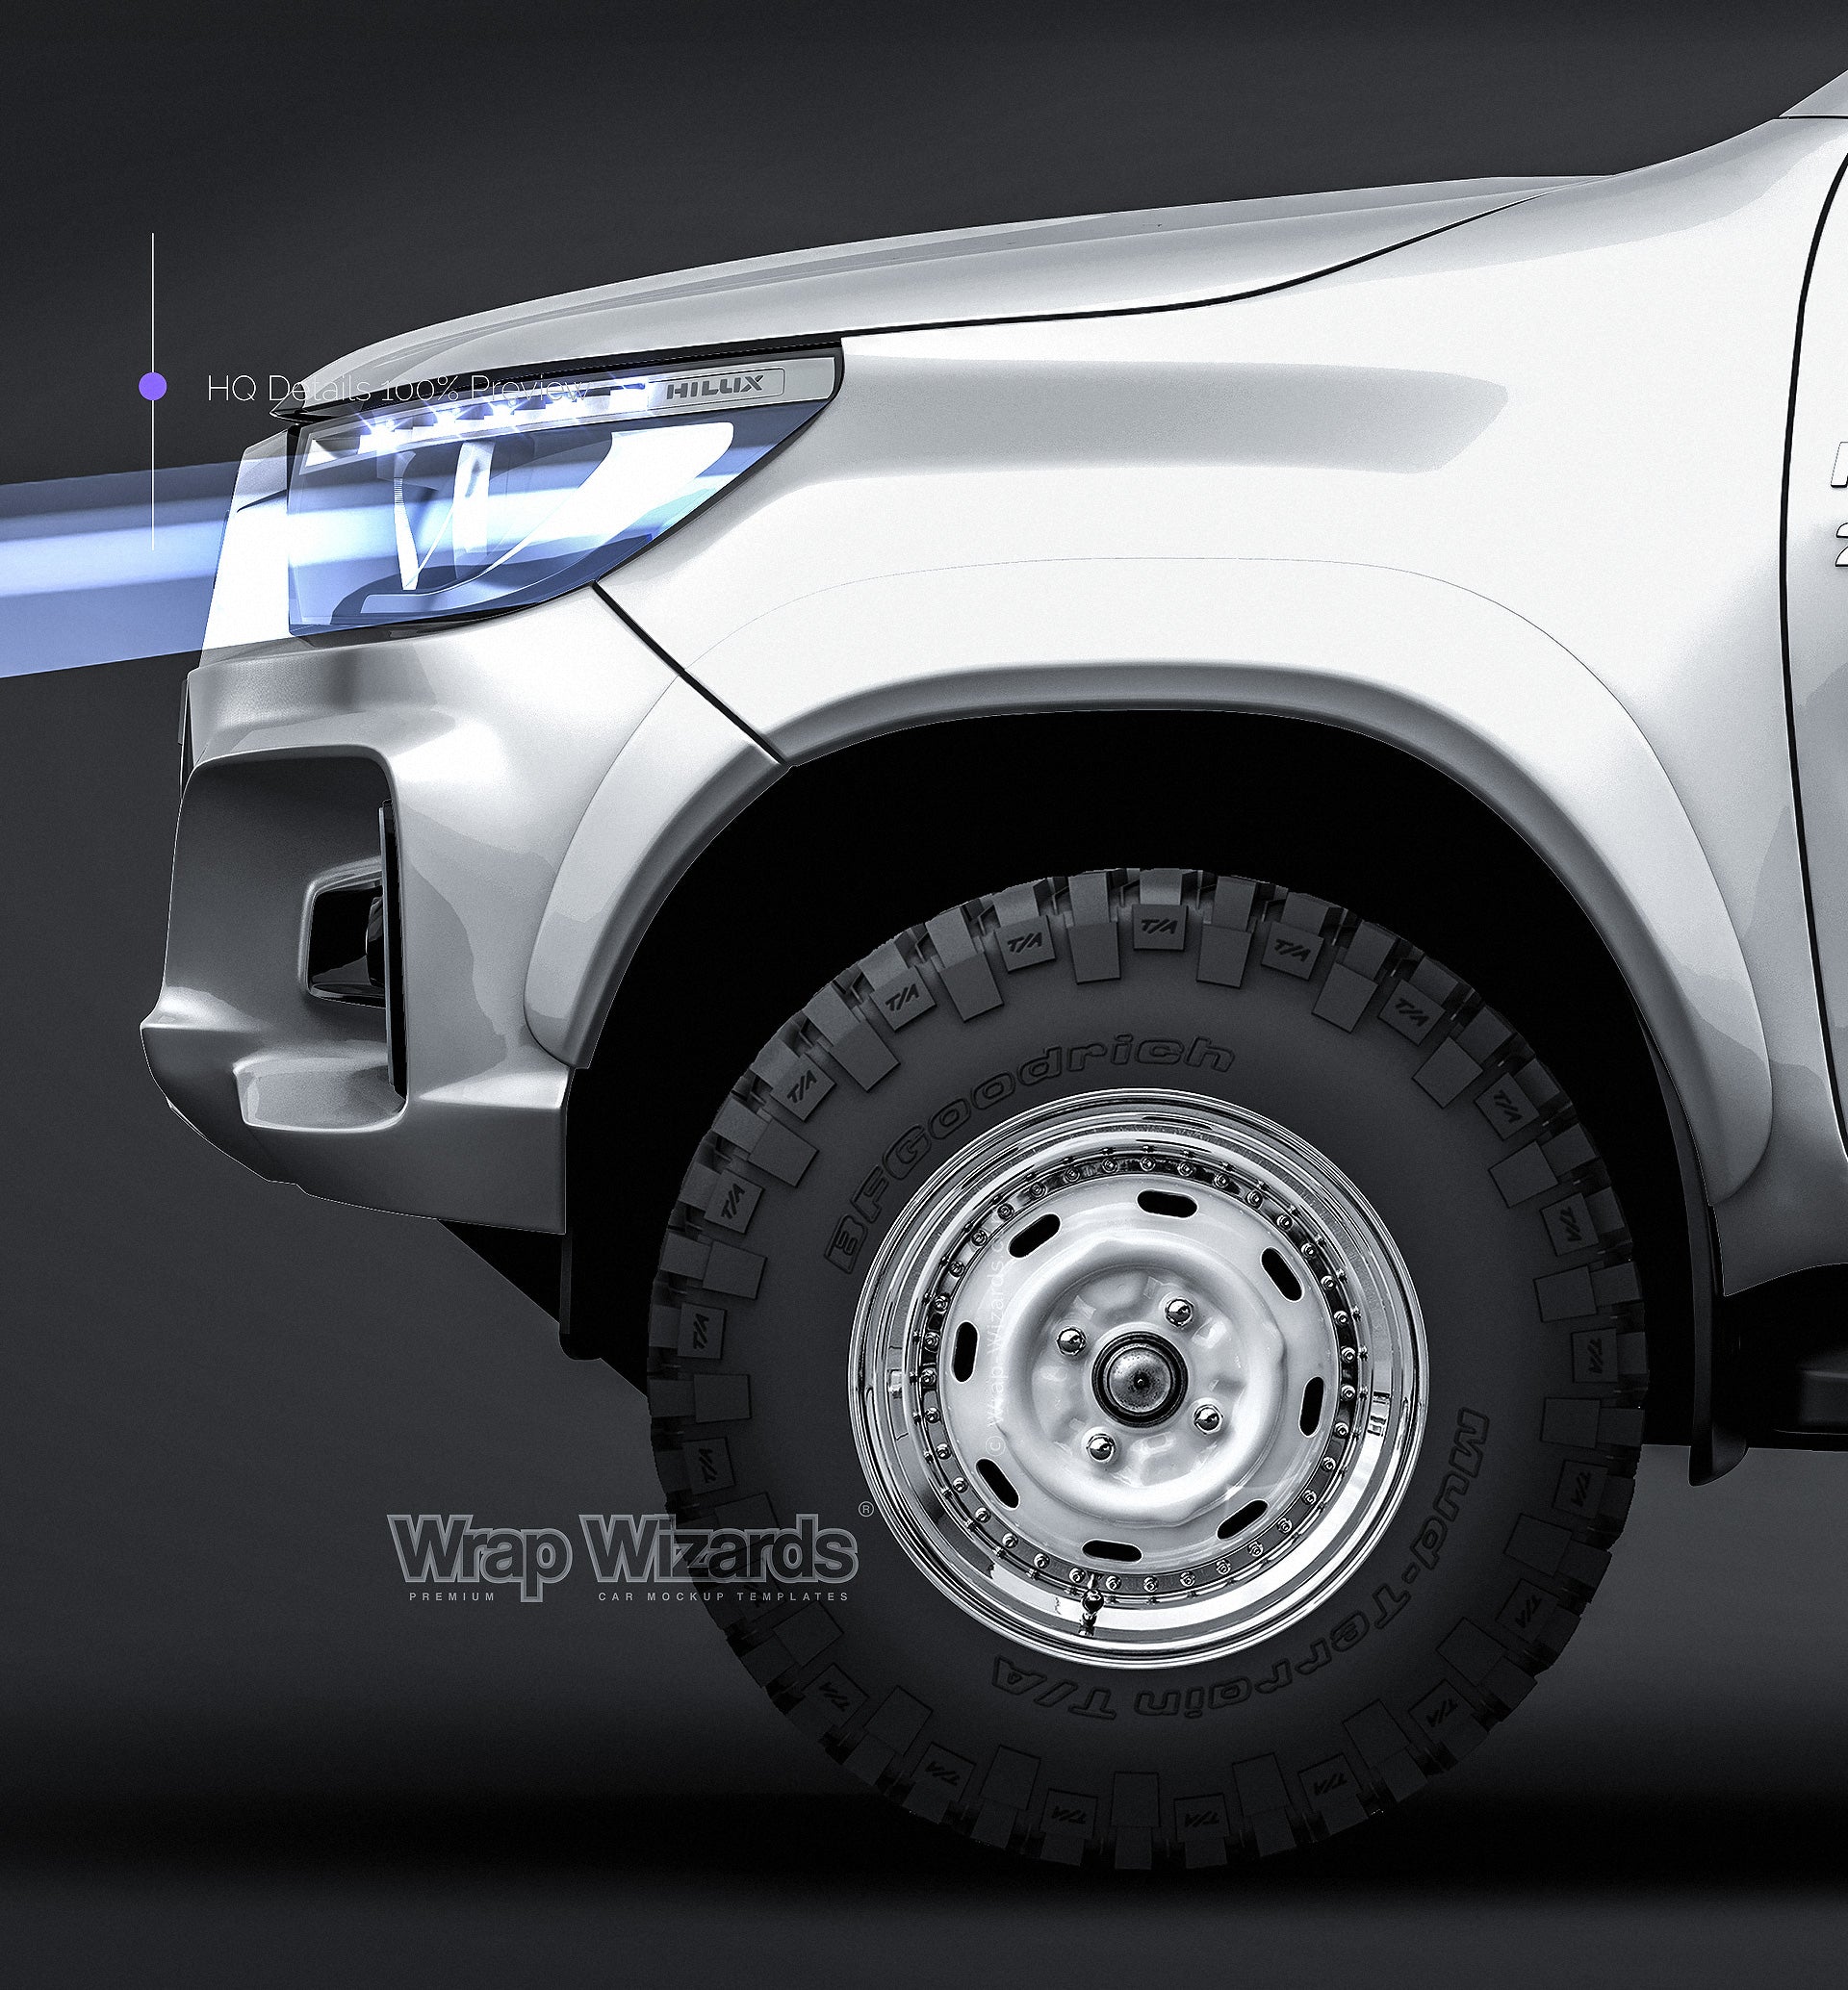 Download Toyota Hilux Revo Rocco 2018 all sides Car Mockup Template ...